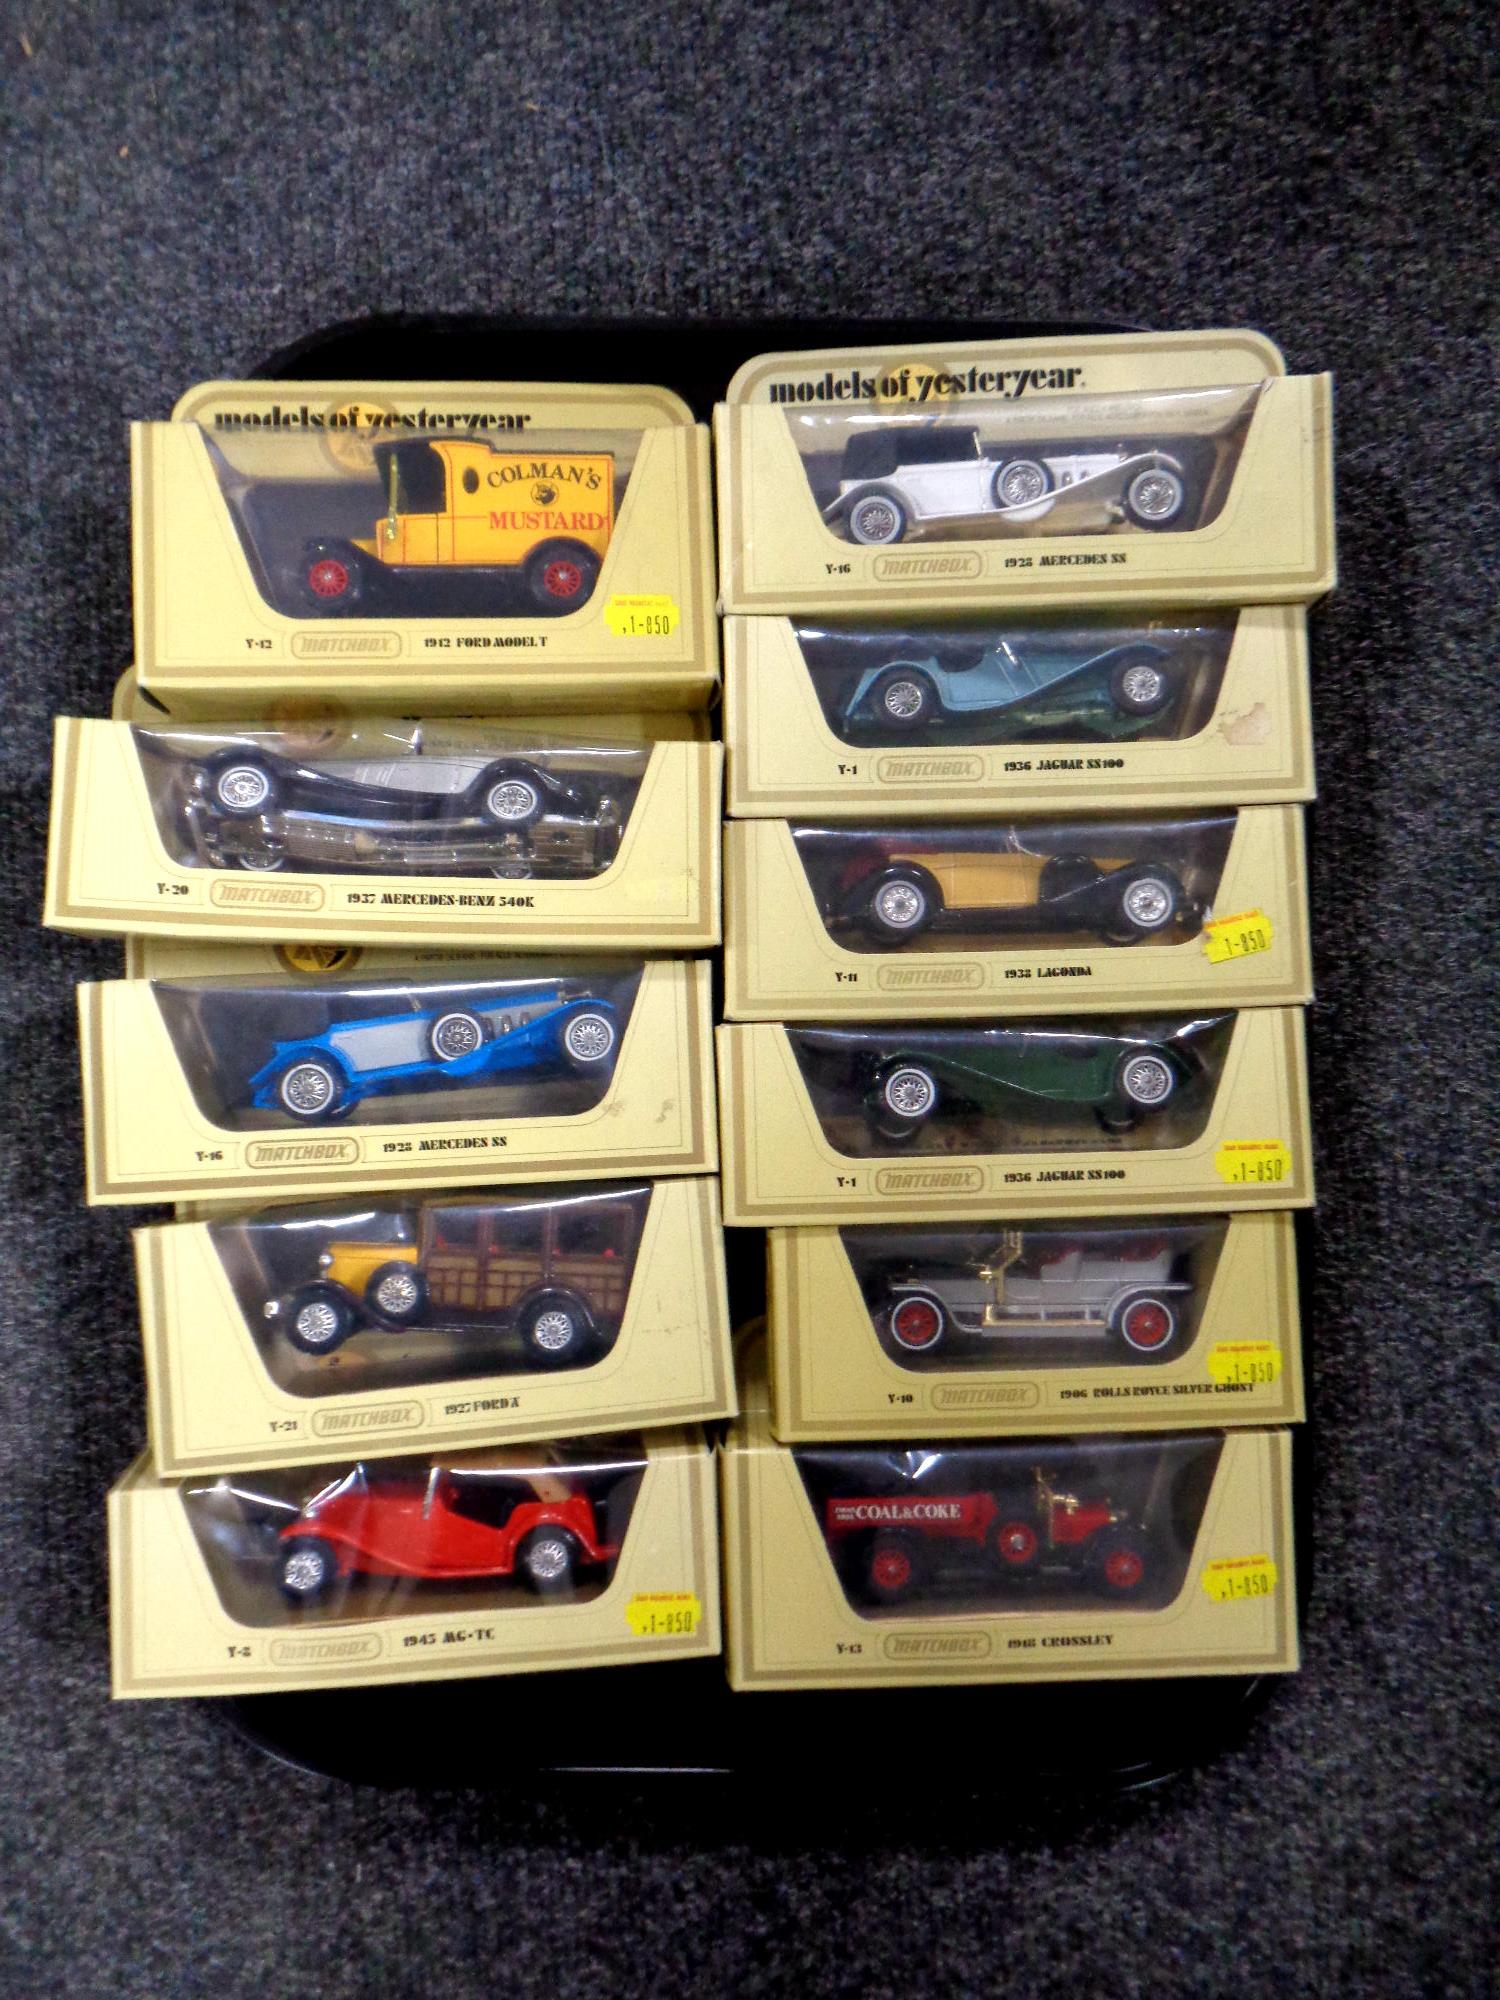 A tray containing 11 Matchbox Models of Yesteryear die cast delivery vehicles and classic cars,